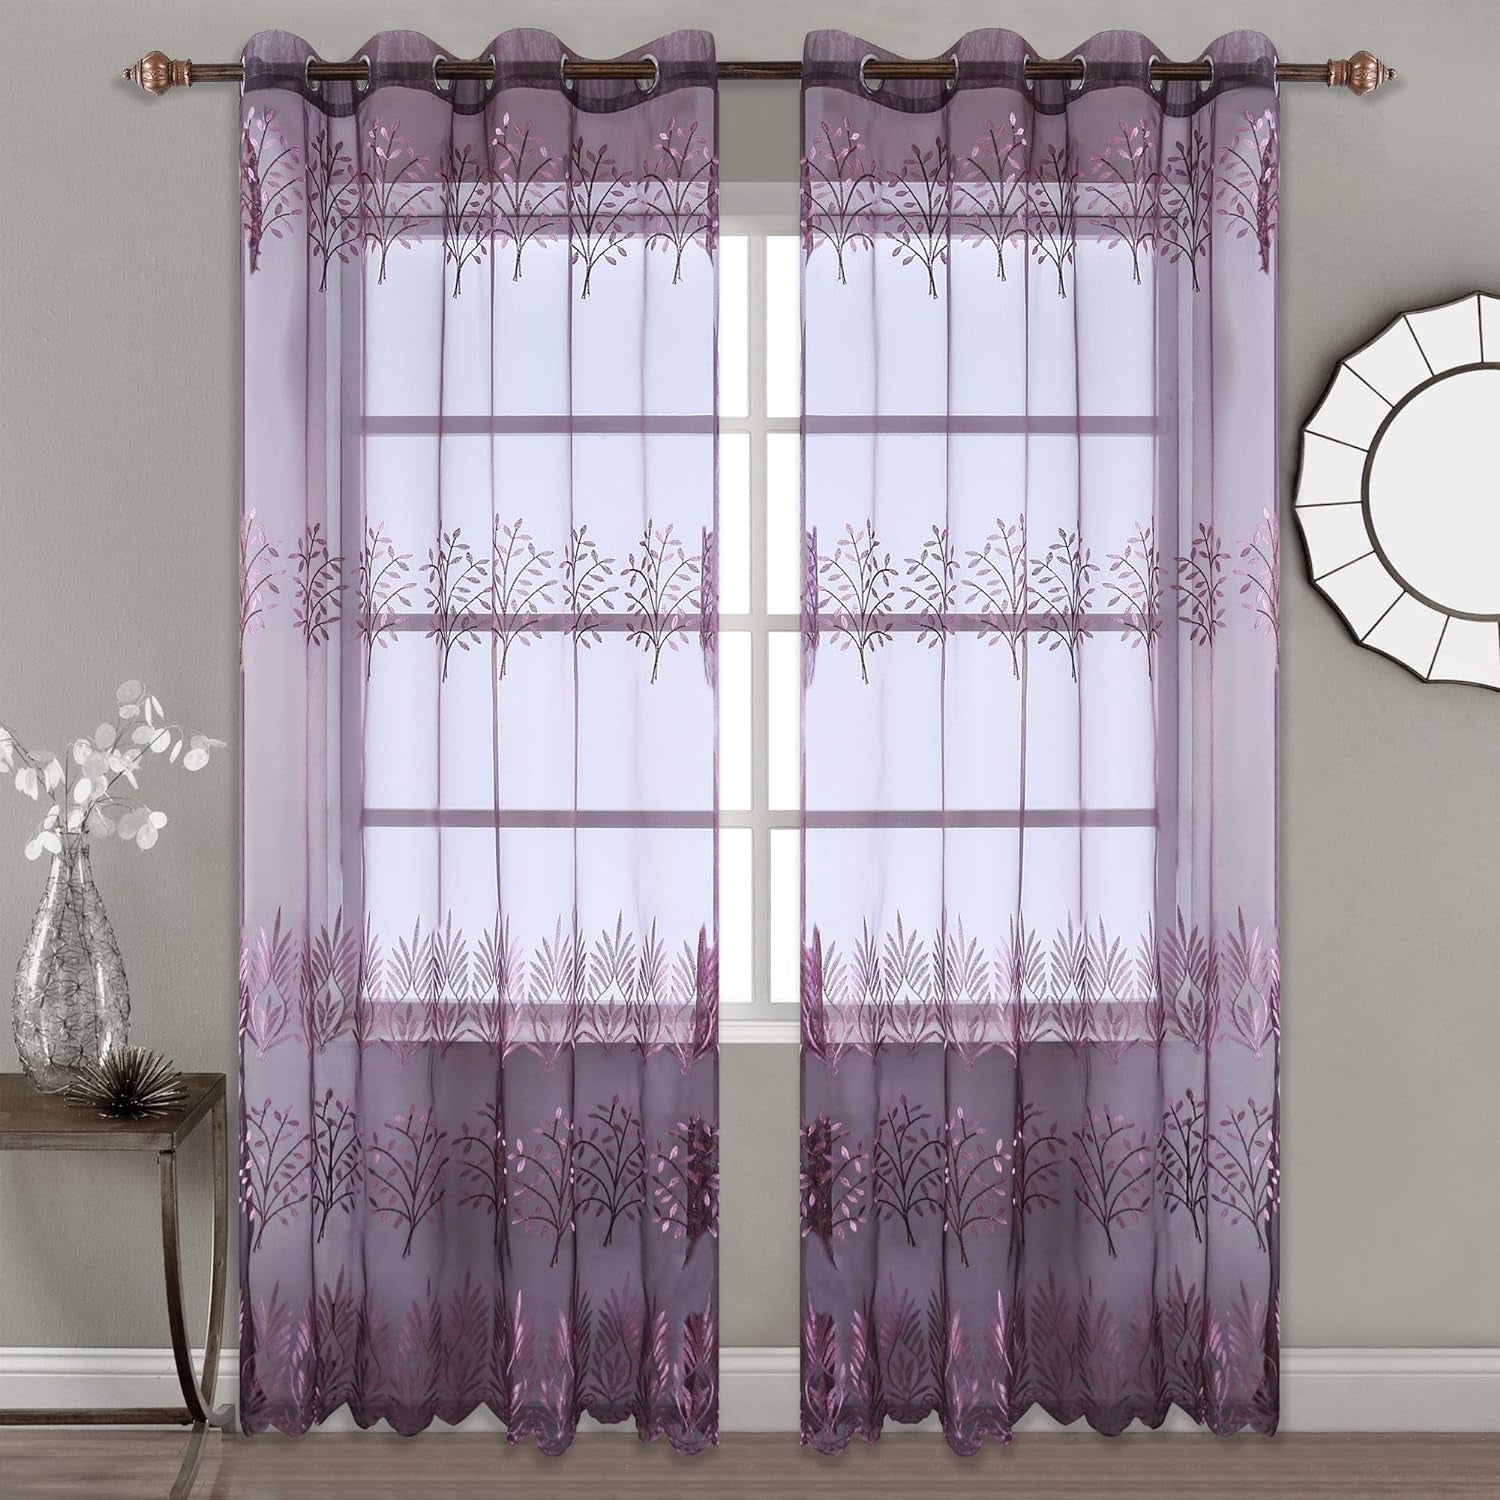 DONREN Tree Branch Printed Embroidery Sheer Curtains for Bedroom - Luxury Plum Purple Embroidery Sheer Curtain Panels for Living Room (W 52 X L 84 Inch,2 Panels)  DONREN   